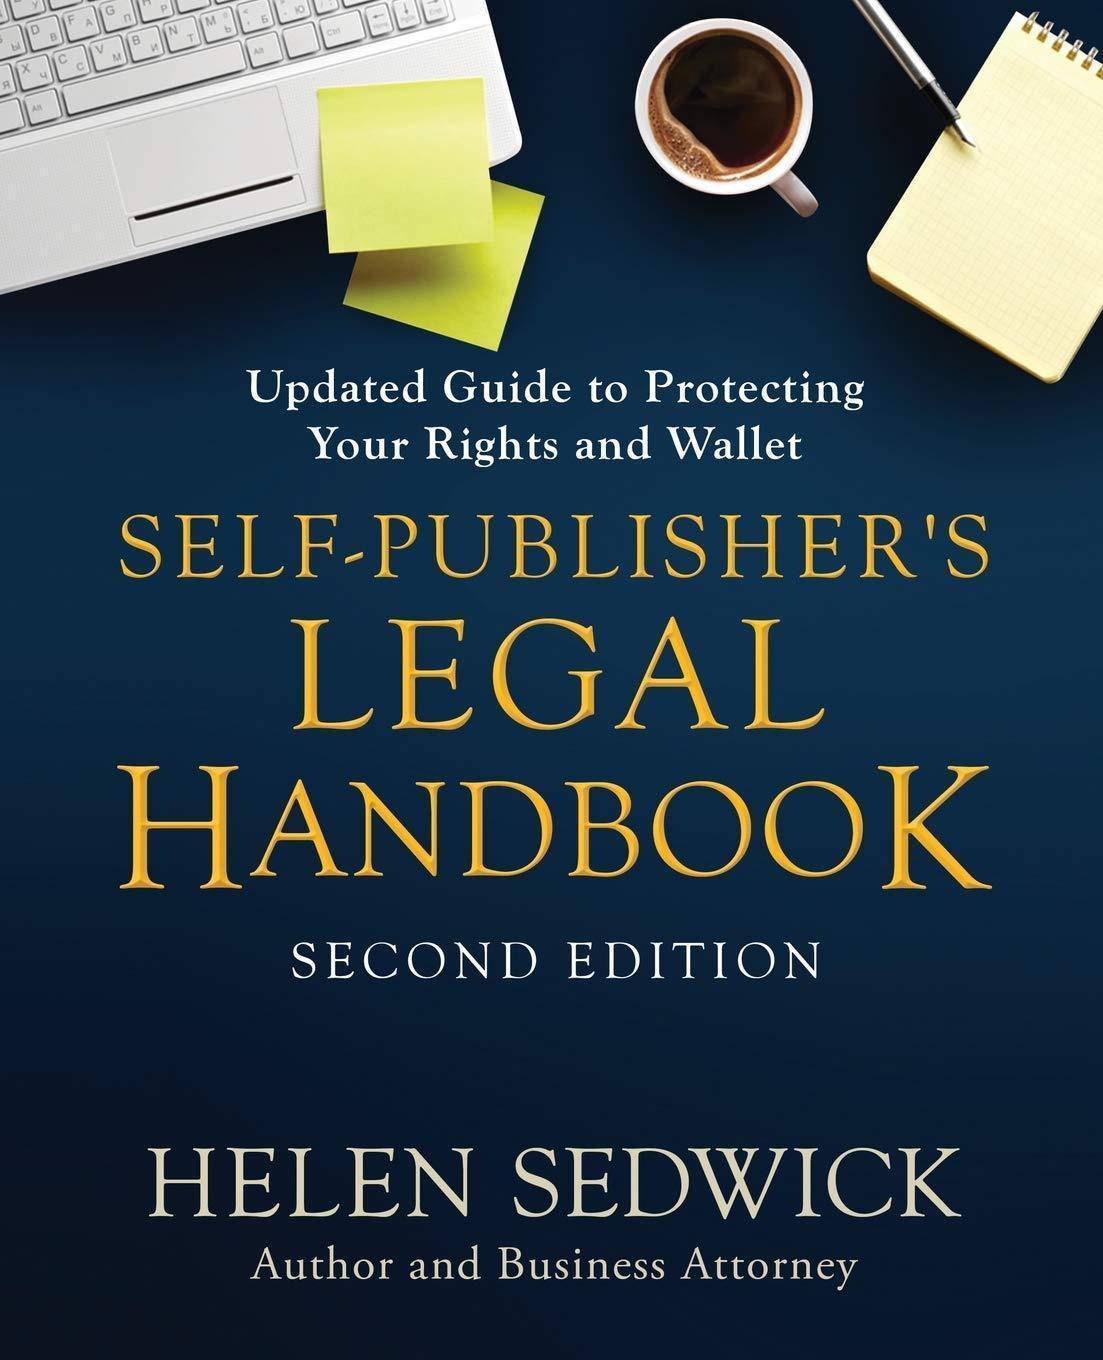 Self-Publisher's Legal Handbook: Updated Guide to Protecting Your Rights and Wallet - SureShot Books Publishing LLC